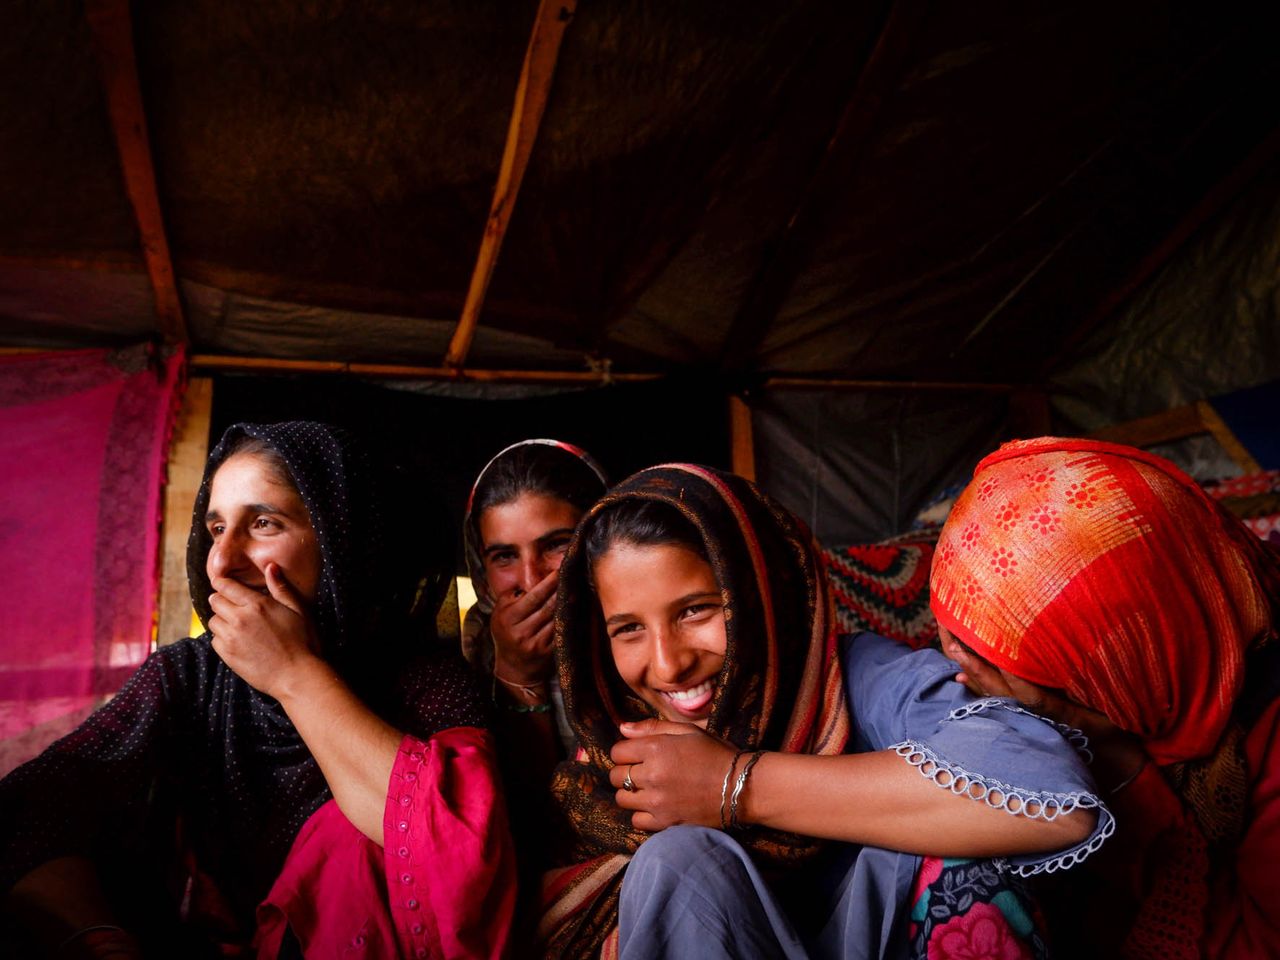 Young women burst into laughter when the conversation turns to menstruation in Chandipora area of central Kashmir on the outskirts of Srinagar. Since it is a taboo among the tribal community to not talk about menstruation openly, the women are shy and find it funny to speak about their experiences. Date: 9 April, 2022.